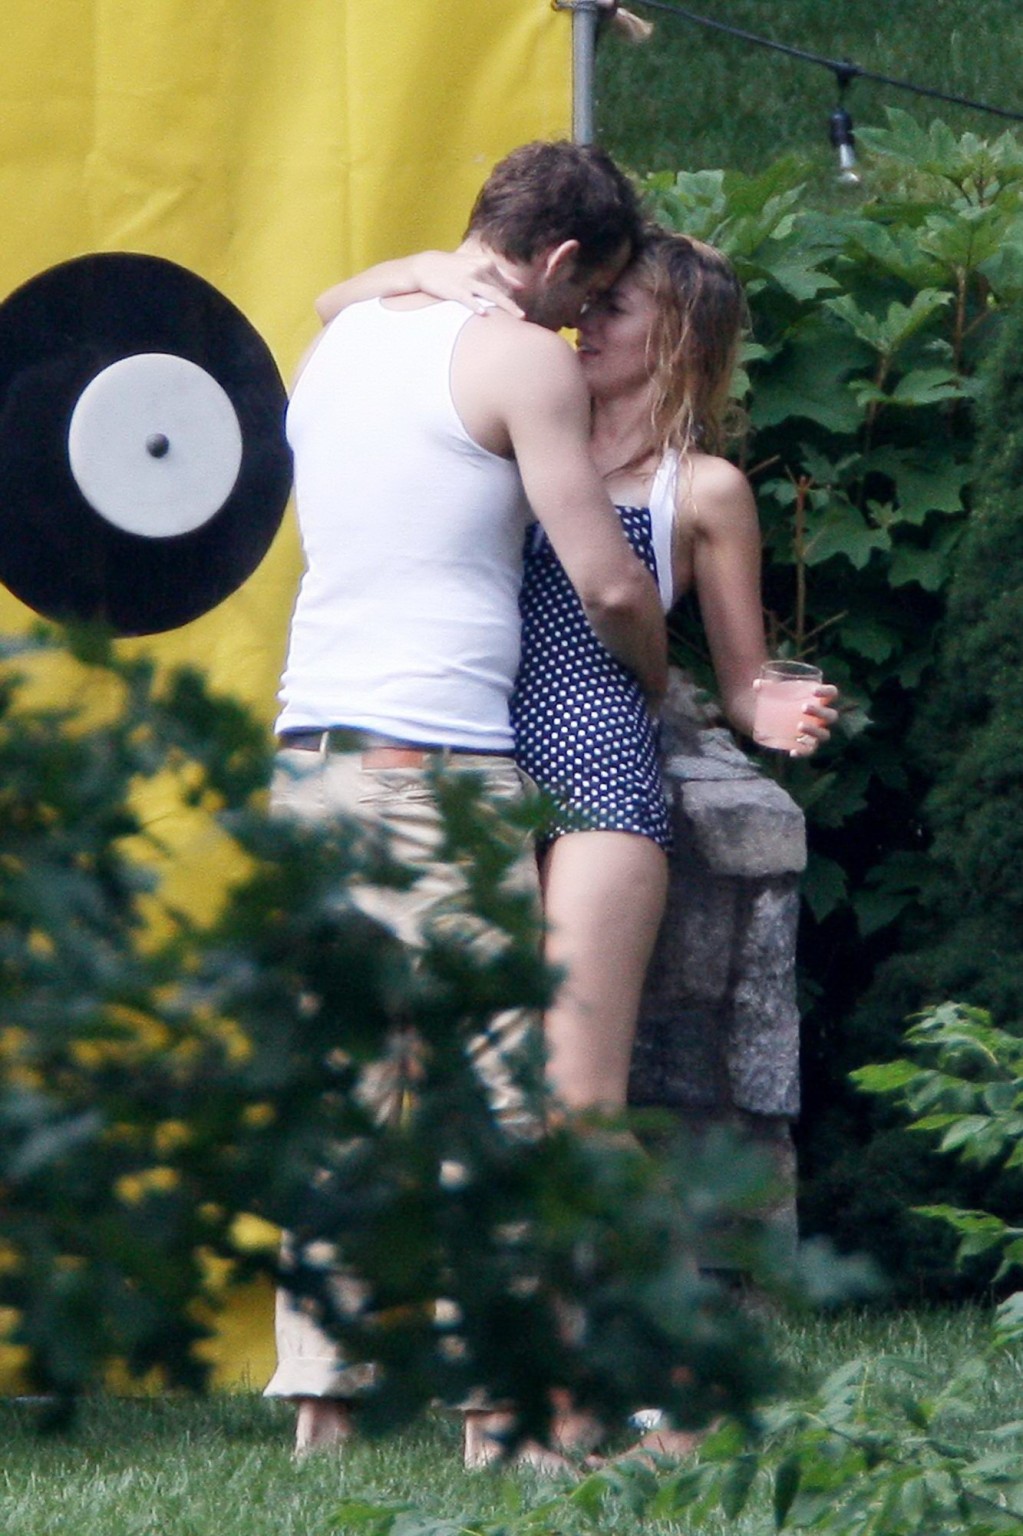 Blake Lively showing her ass in polka dot monokini at the pool party in NYC #75257979